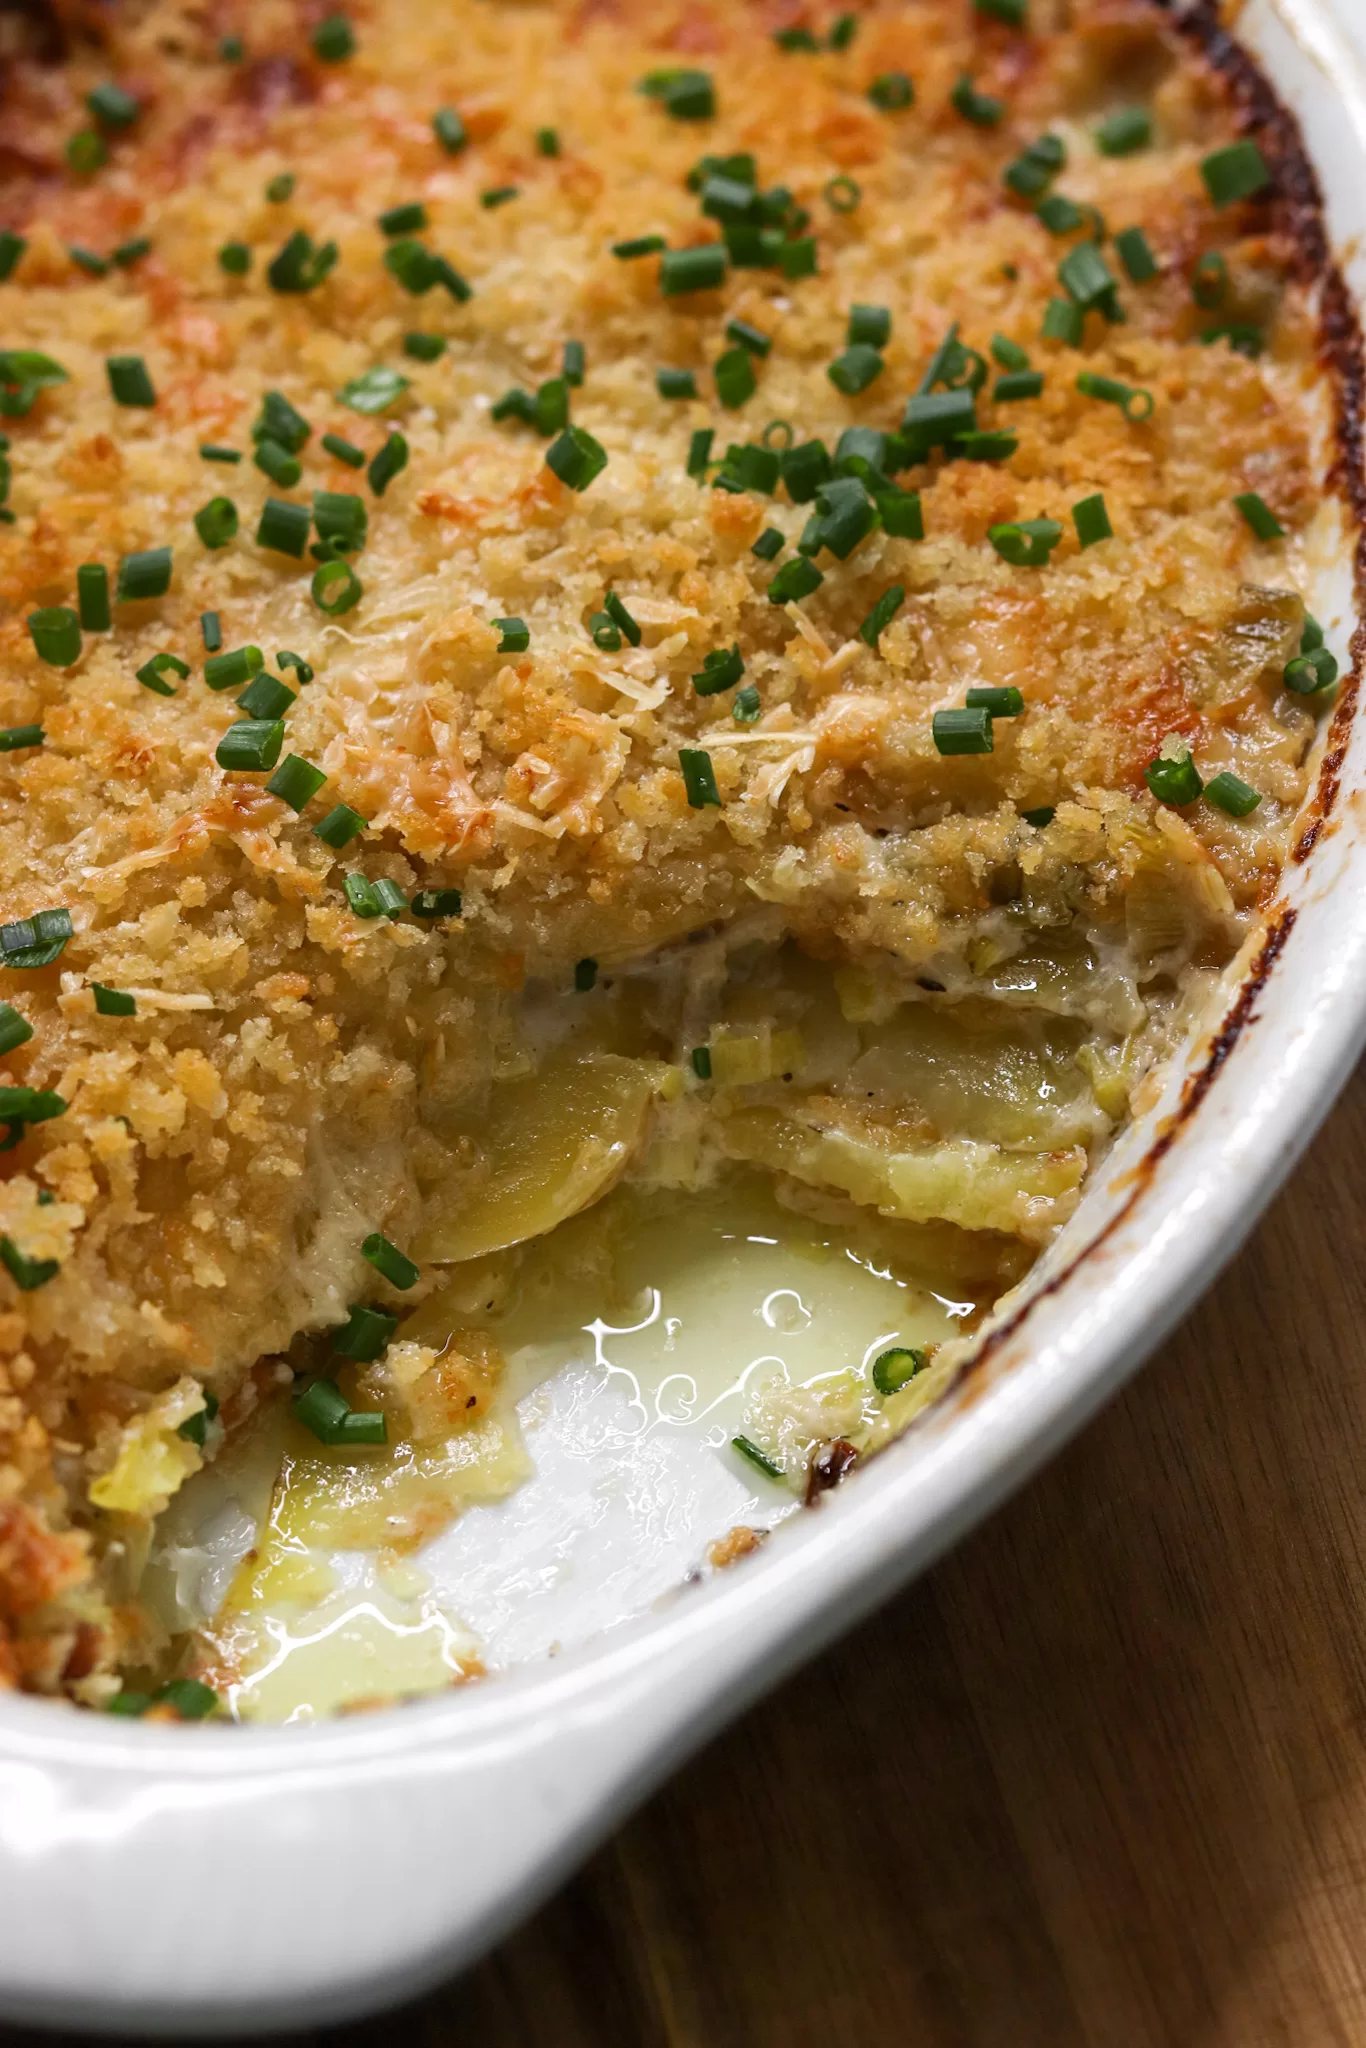 Potato leek gratin with a scoop taken out, showing the layers of thinly sliced potatoes inside.